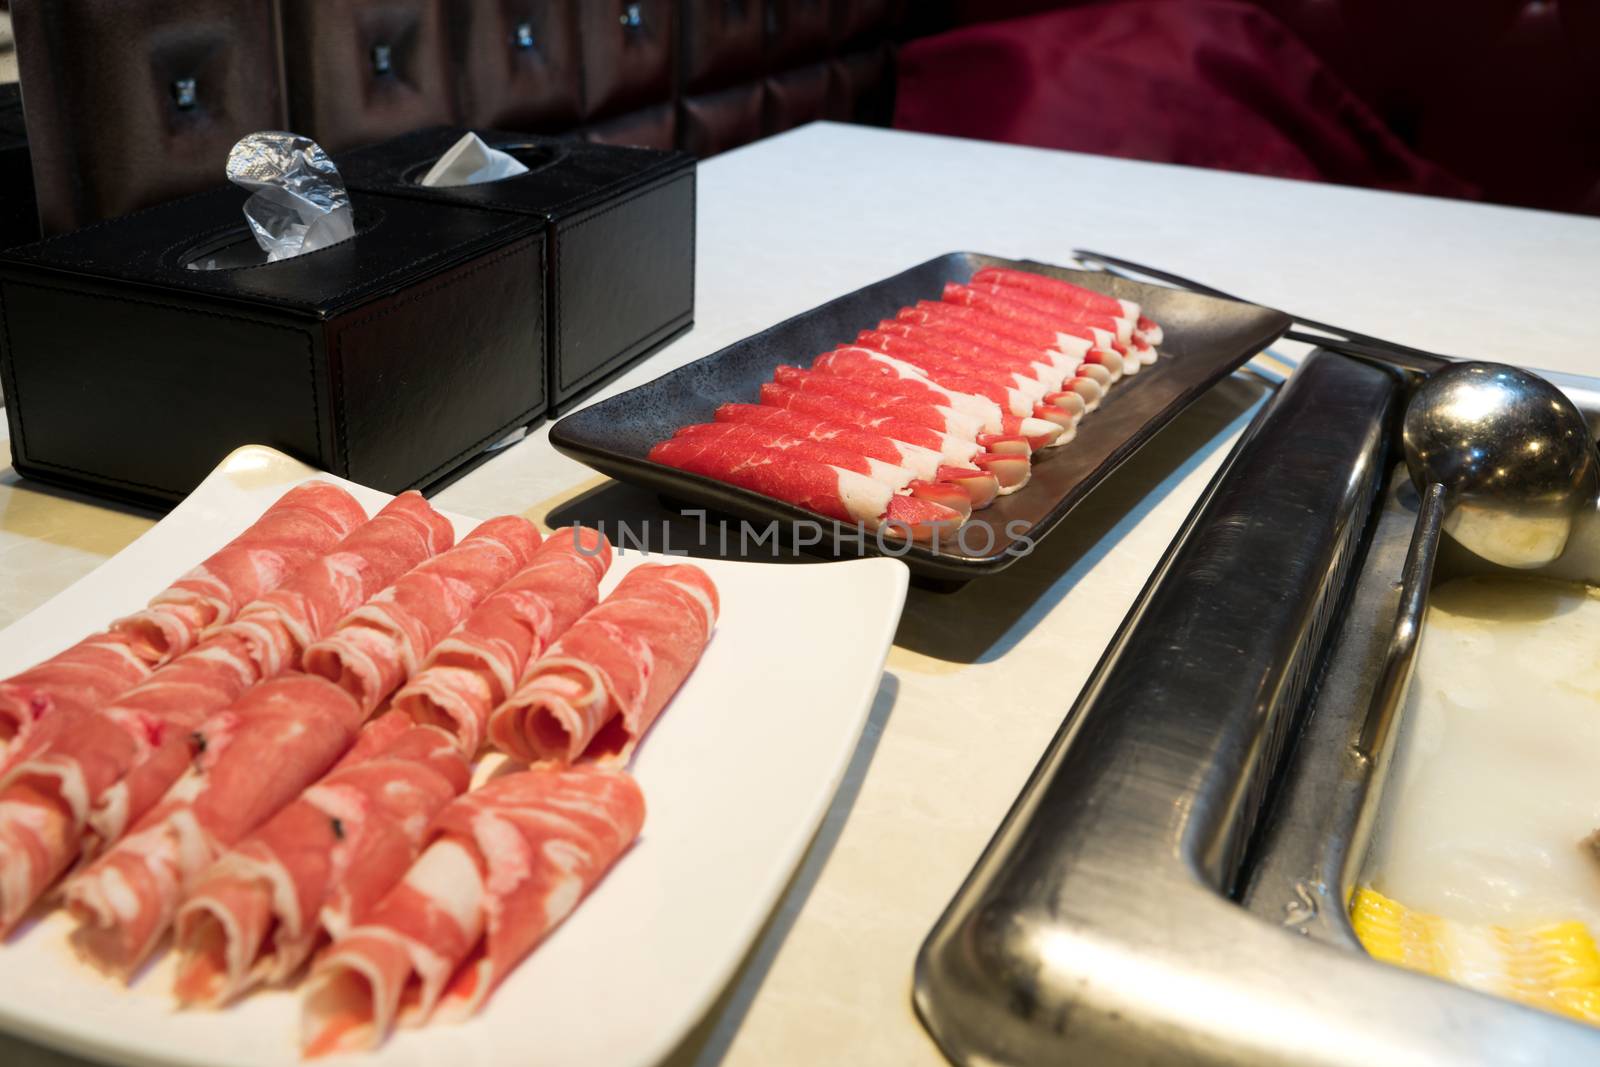 the meat and lamp slide for Chinese shabu style, yummy